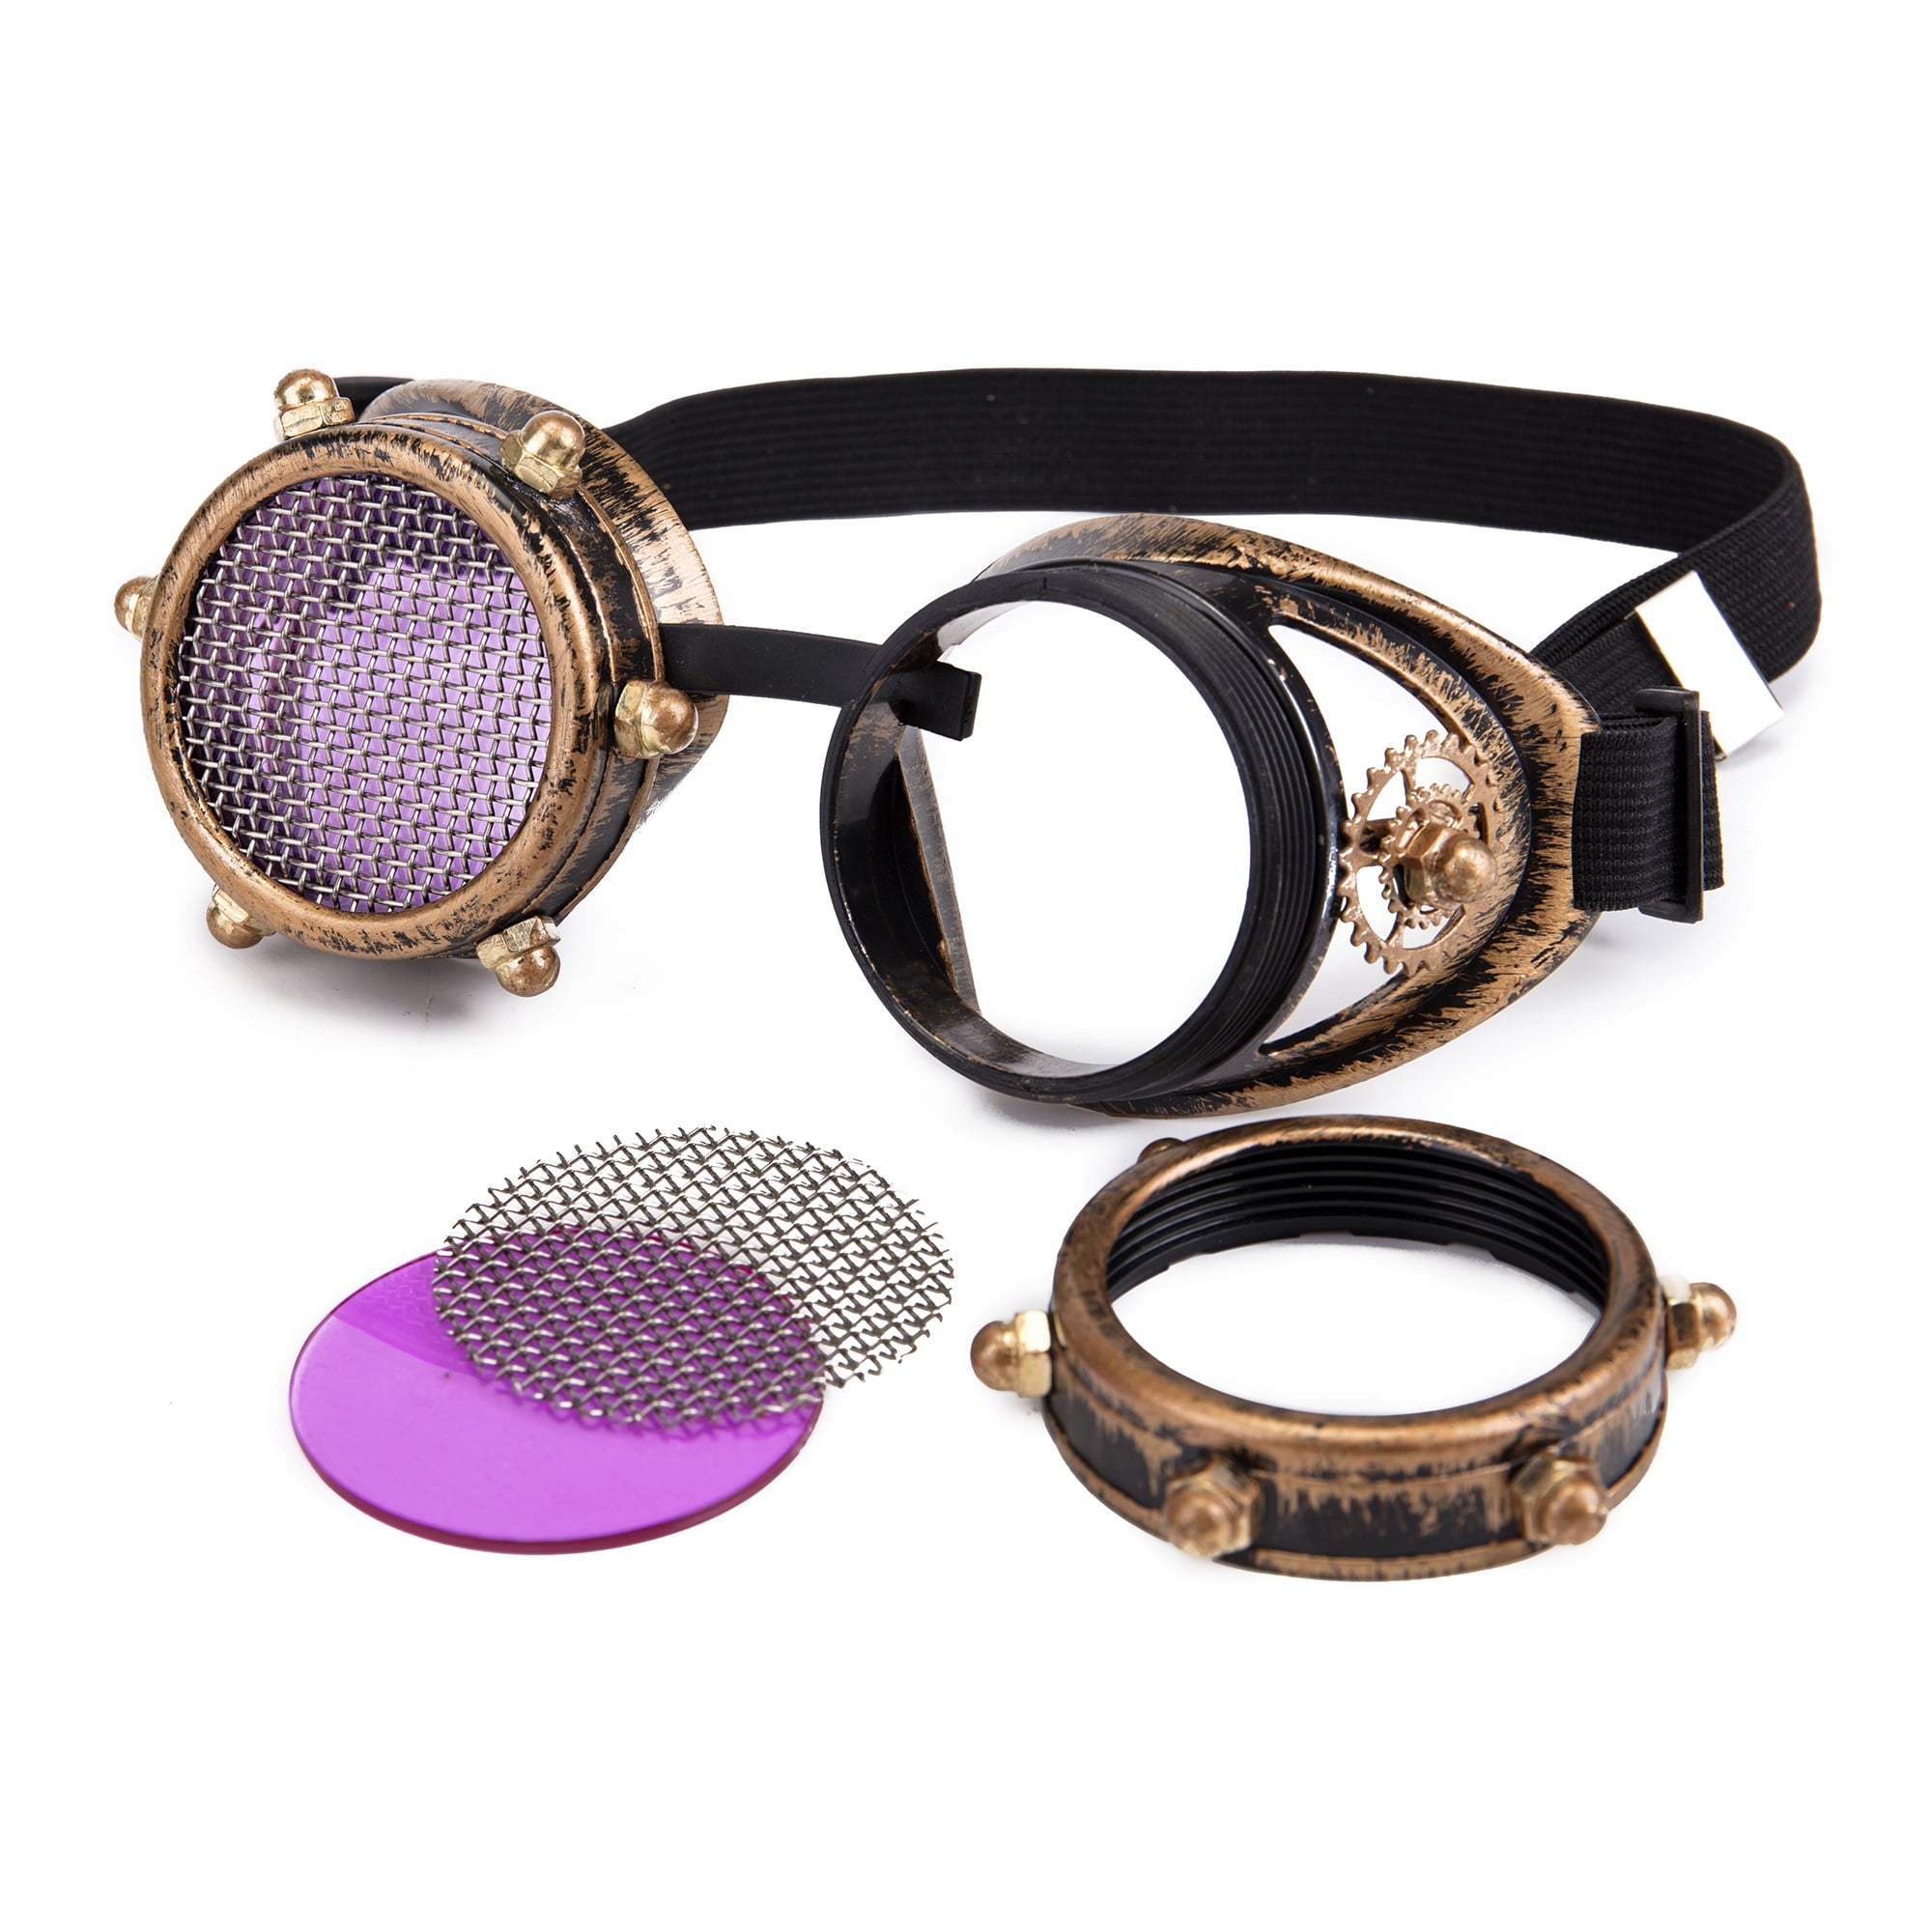 Cfgoggle Barbed Wire Led Light Steampunk Goggles Rainbow Kaleidoscope Sunglasses Special Lens 